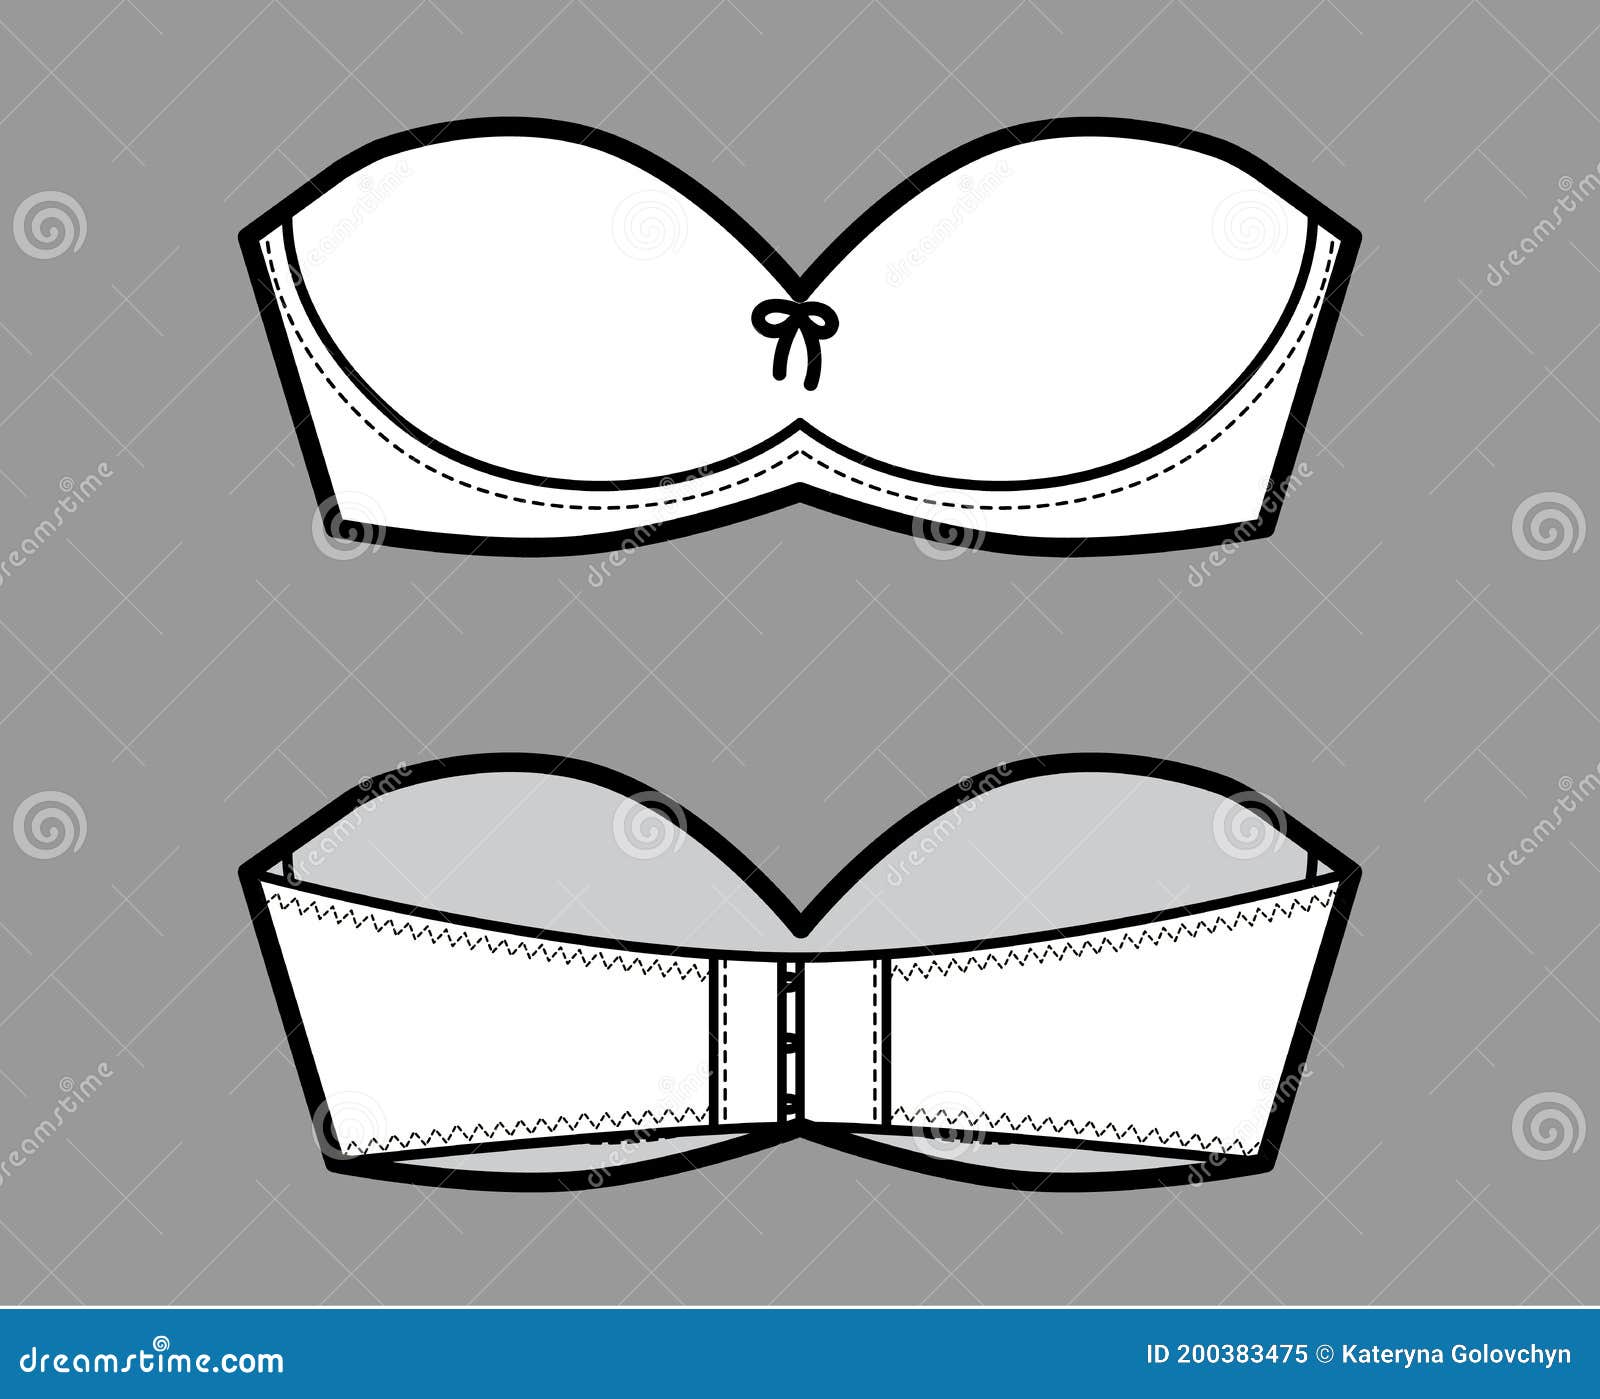 Bra Strapless Lingerie Technical Fashion Illustration with Molded